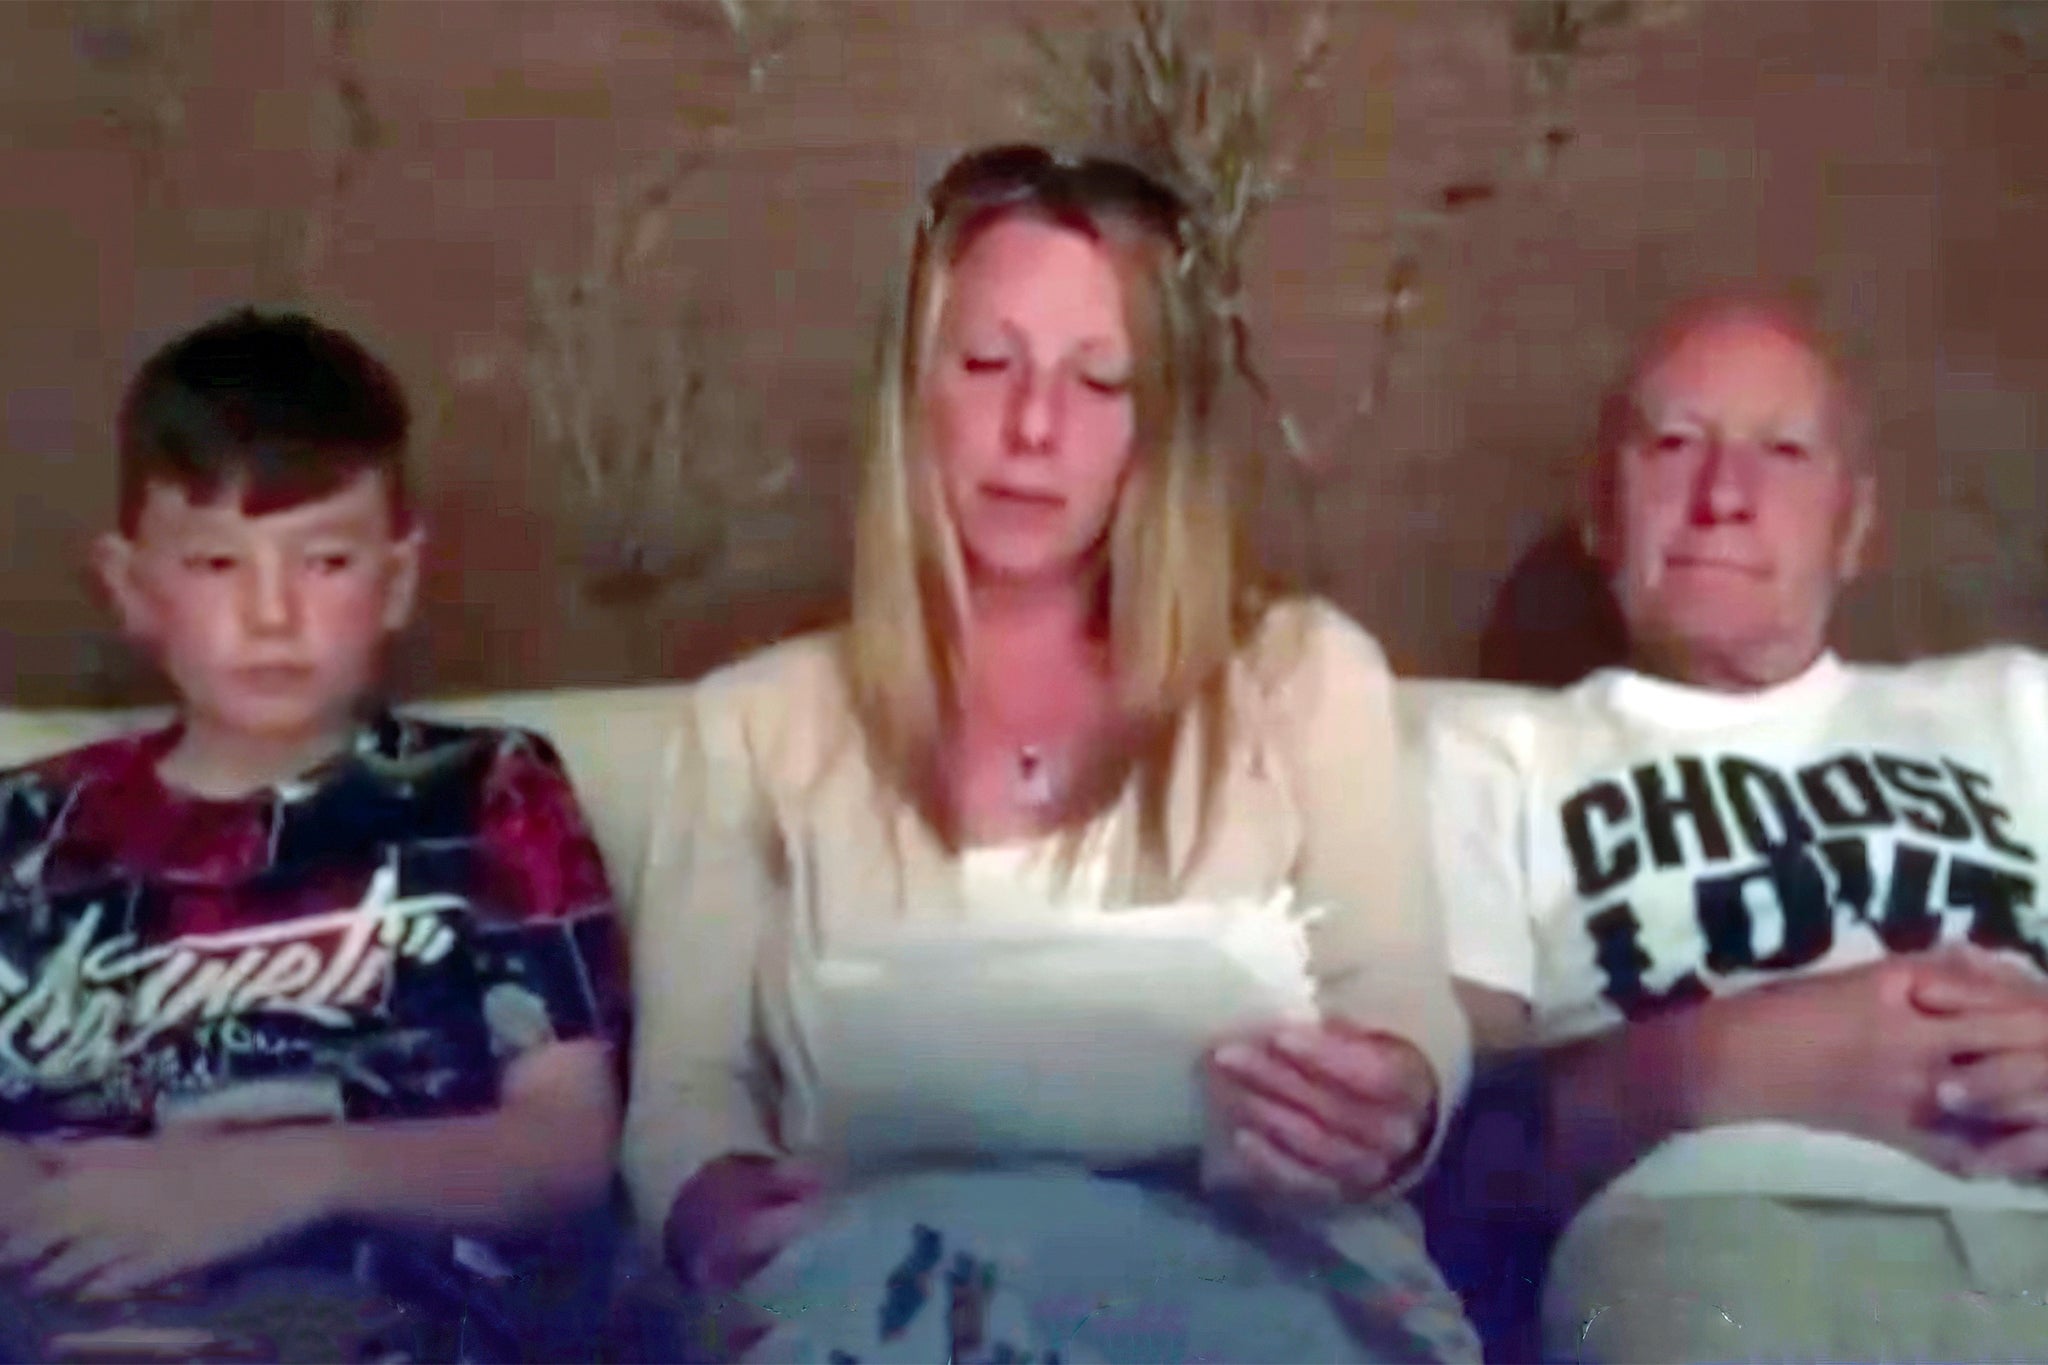 Greater Manchester Police released a video of the Melanie Batty and his grandfather David Batty, with Alex, reading a statement shortly after they disappeared